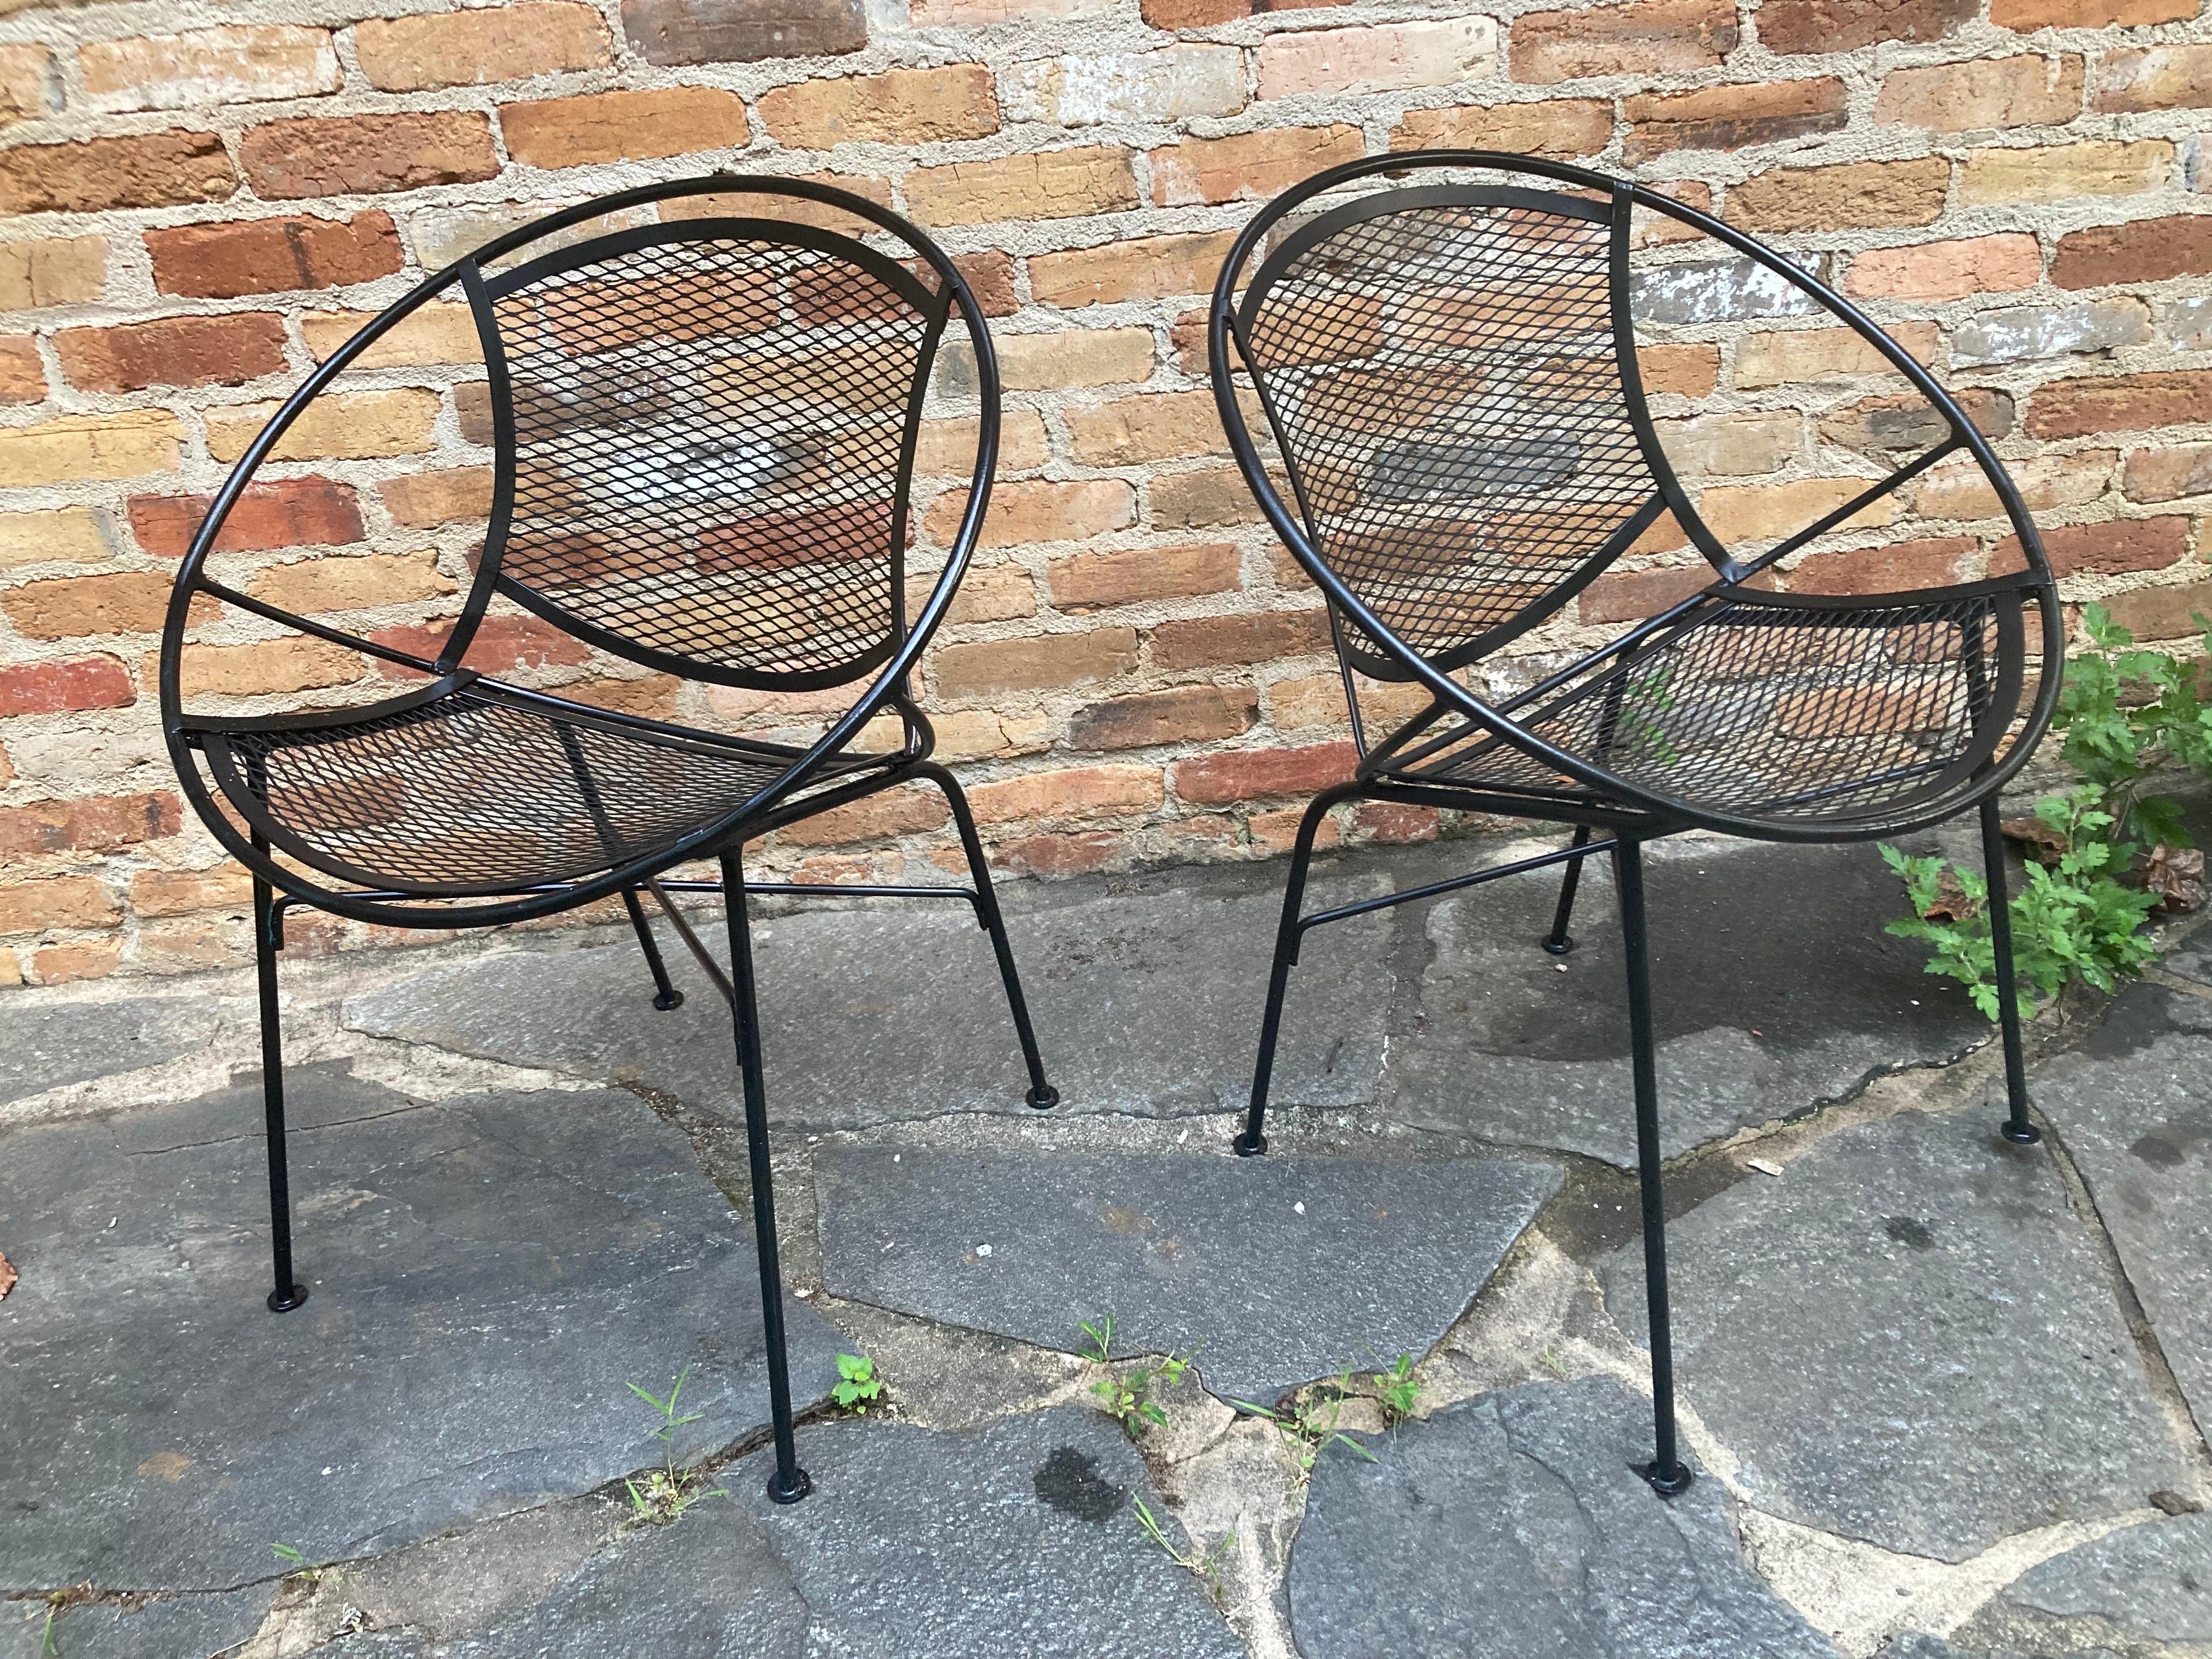 offering pair of satin black wrought iron three seasons or patio lounge chairs designed by Maurizio Tempestini , manufactured by John Salterini
no maker>s mark
multiple sets available

30.25ʺW × 27ʺD × 27.5ʺH

shipping from athens, ga